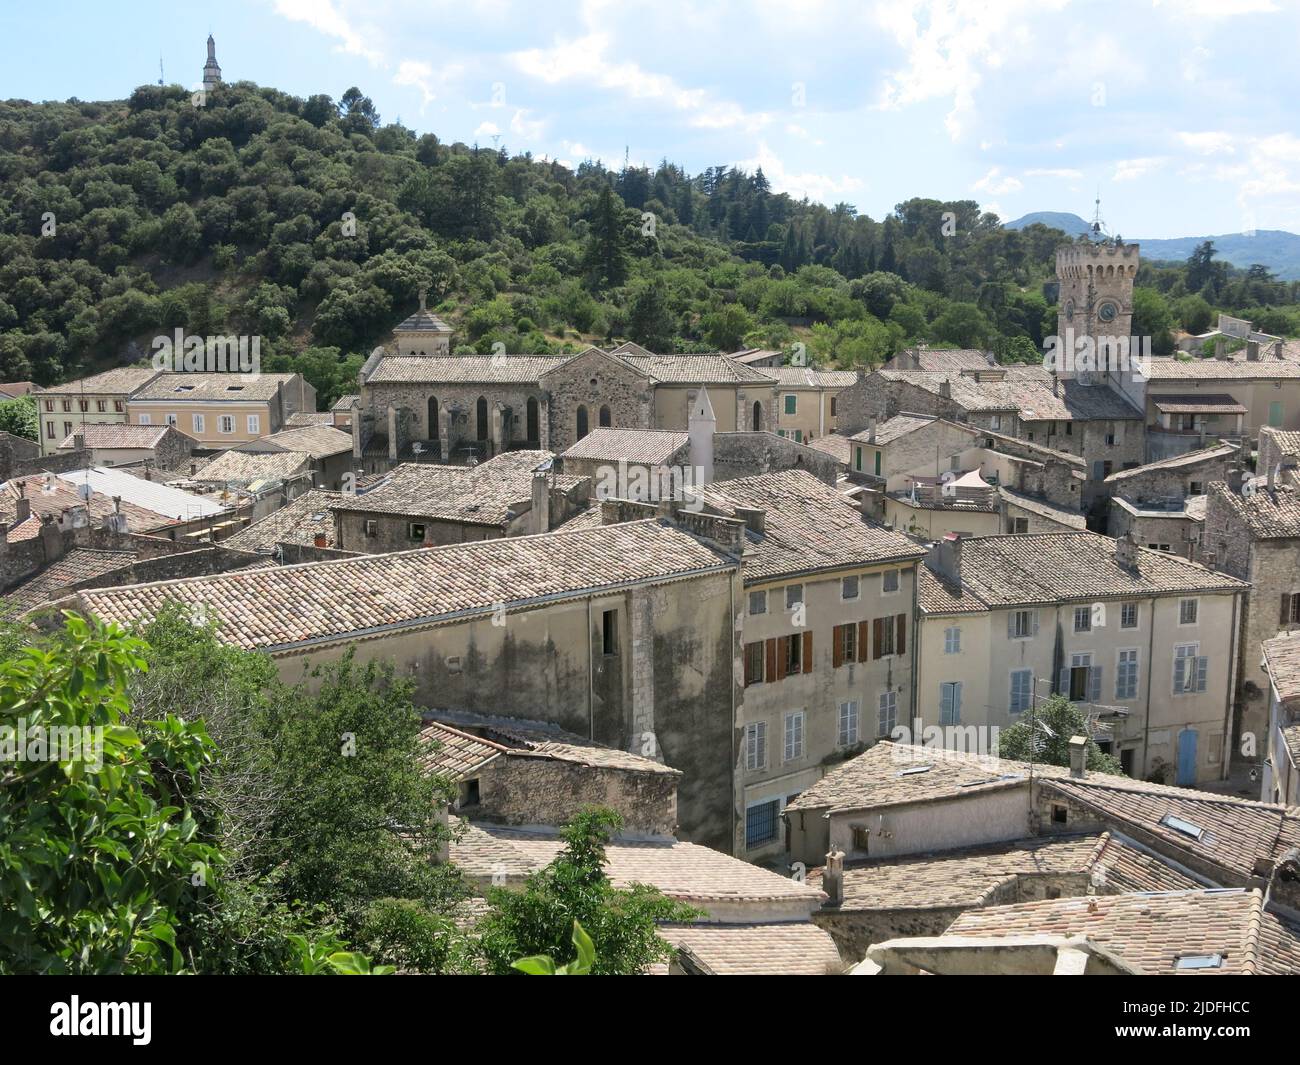 View from the St Vincent Cathedral over the rooftops and warren of narrow streets in Viviers, with historic buildings & the smallest city in France. Stock Photo